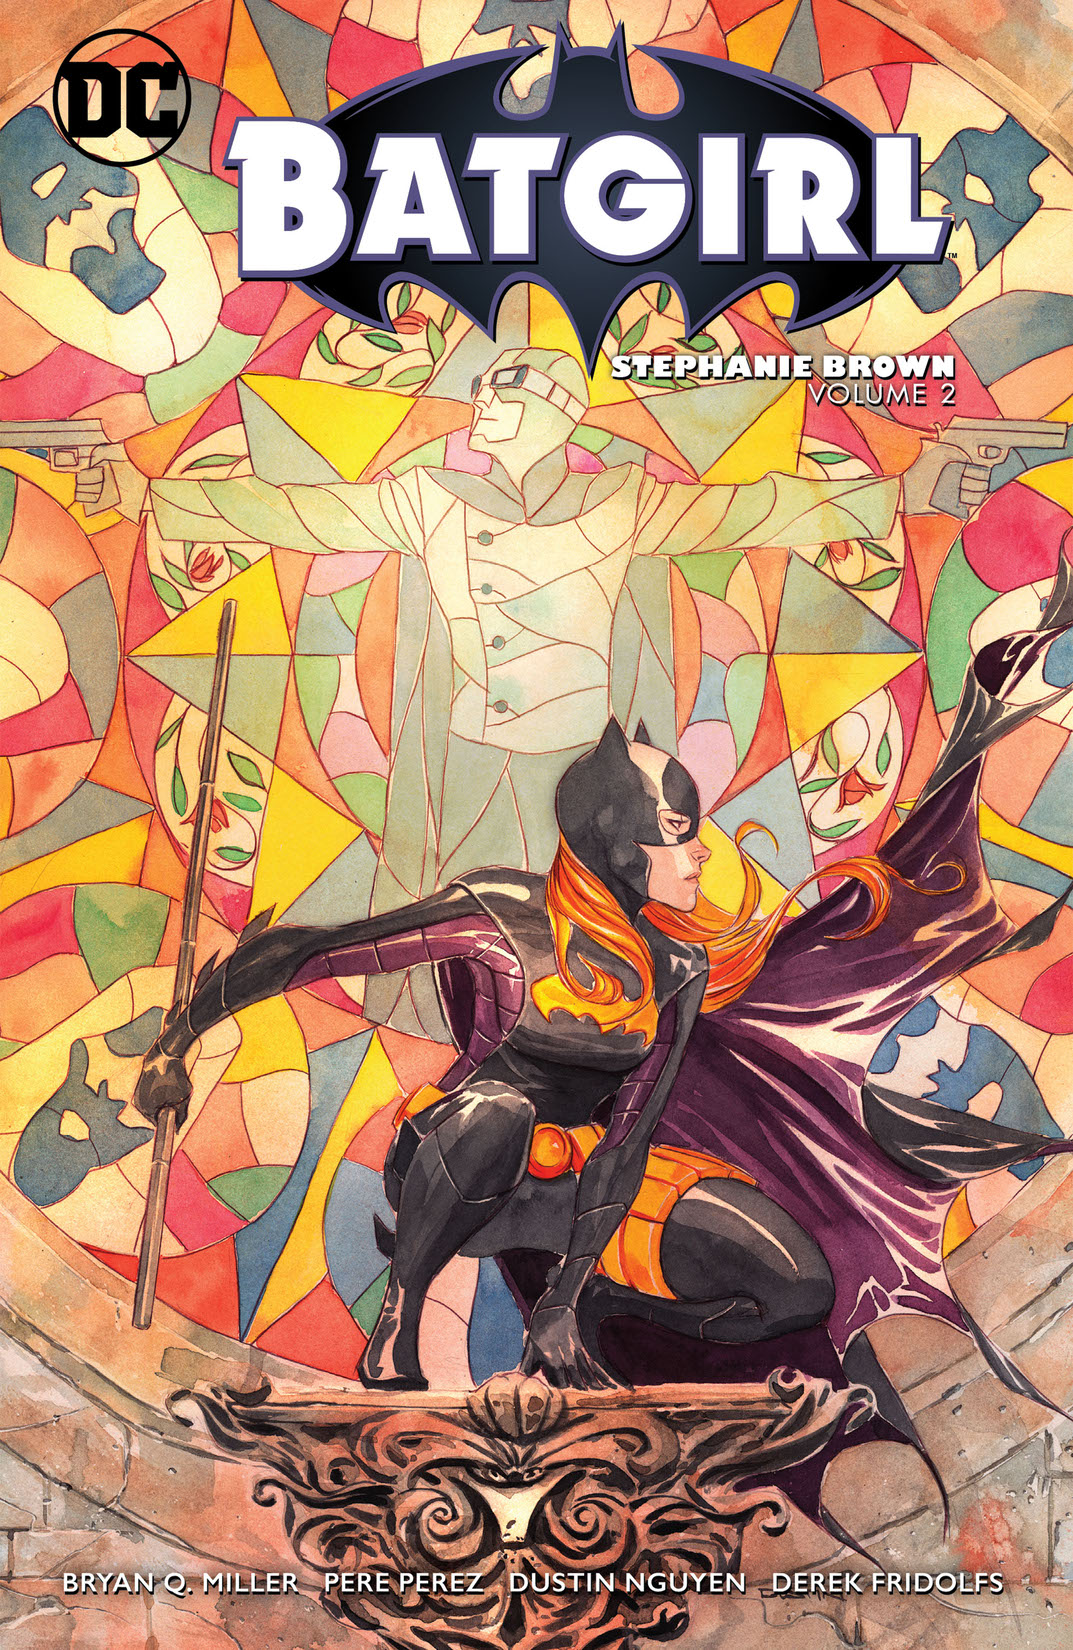 Batgirl: Stephanie Brown Vol. 2 preview images